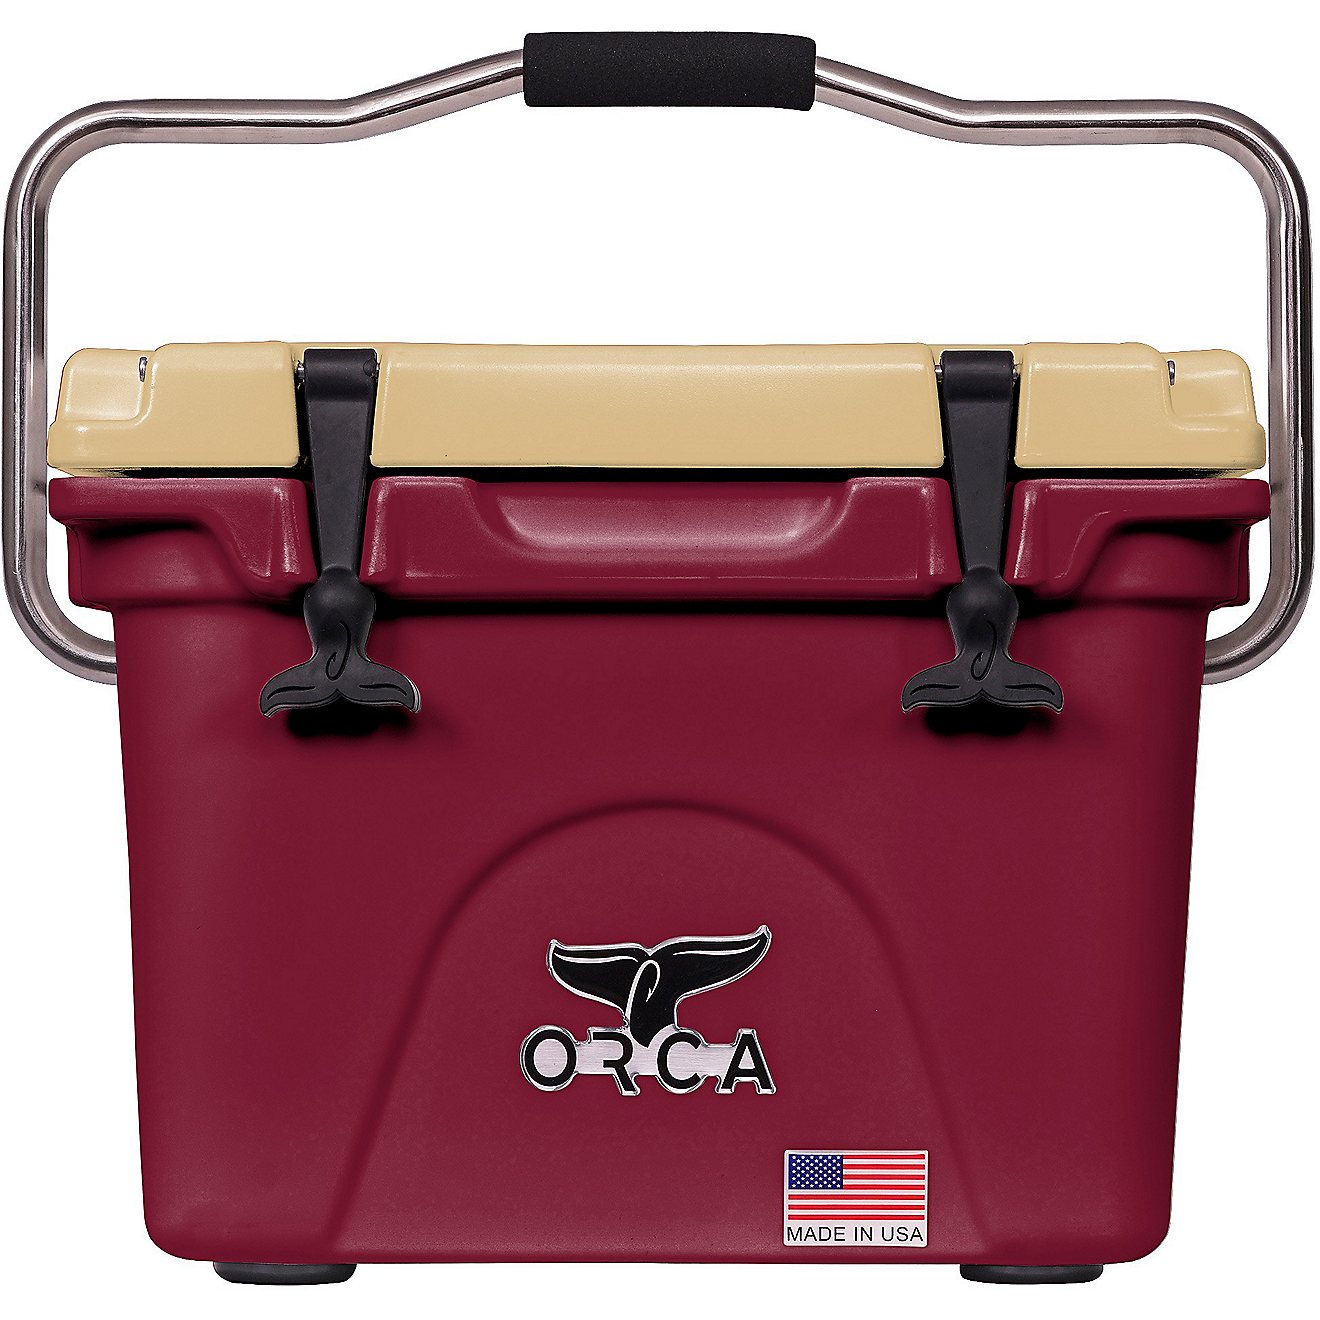 ORCA Florida State University 20 qt Cooler                                                                                       - view number 3